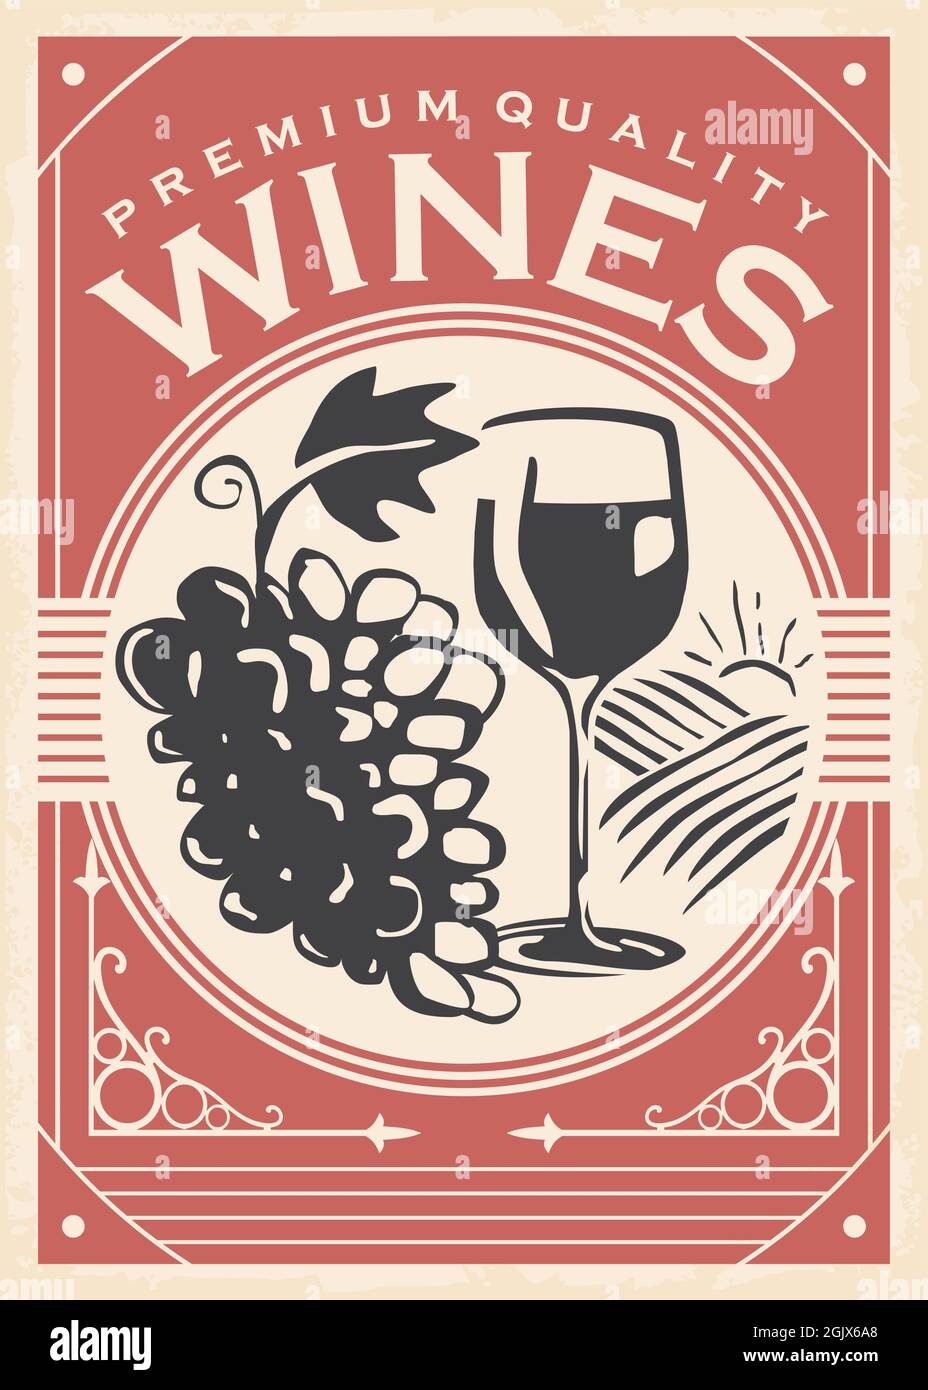 Wines retro poster. Grapes and wine glass vector image. Vintage ad for vineyard and wine cellar Stock Vector